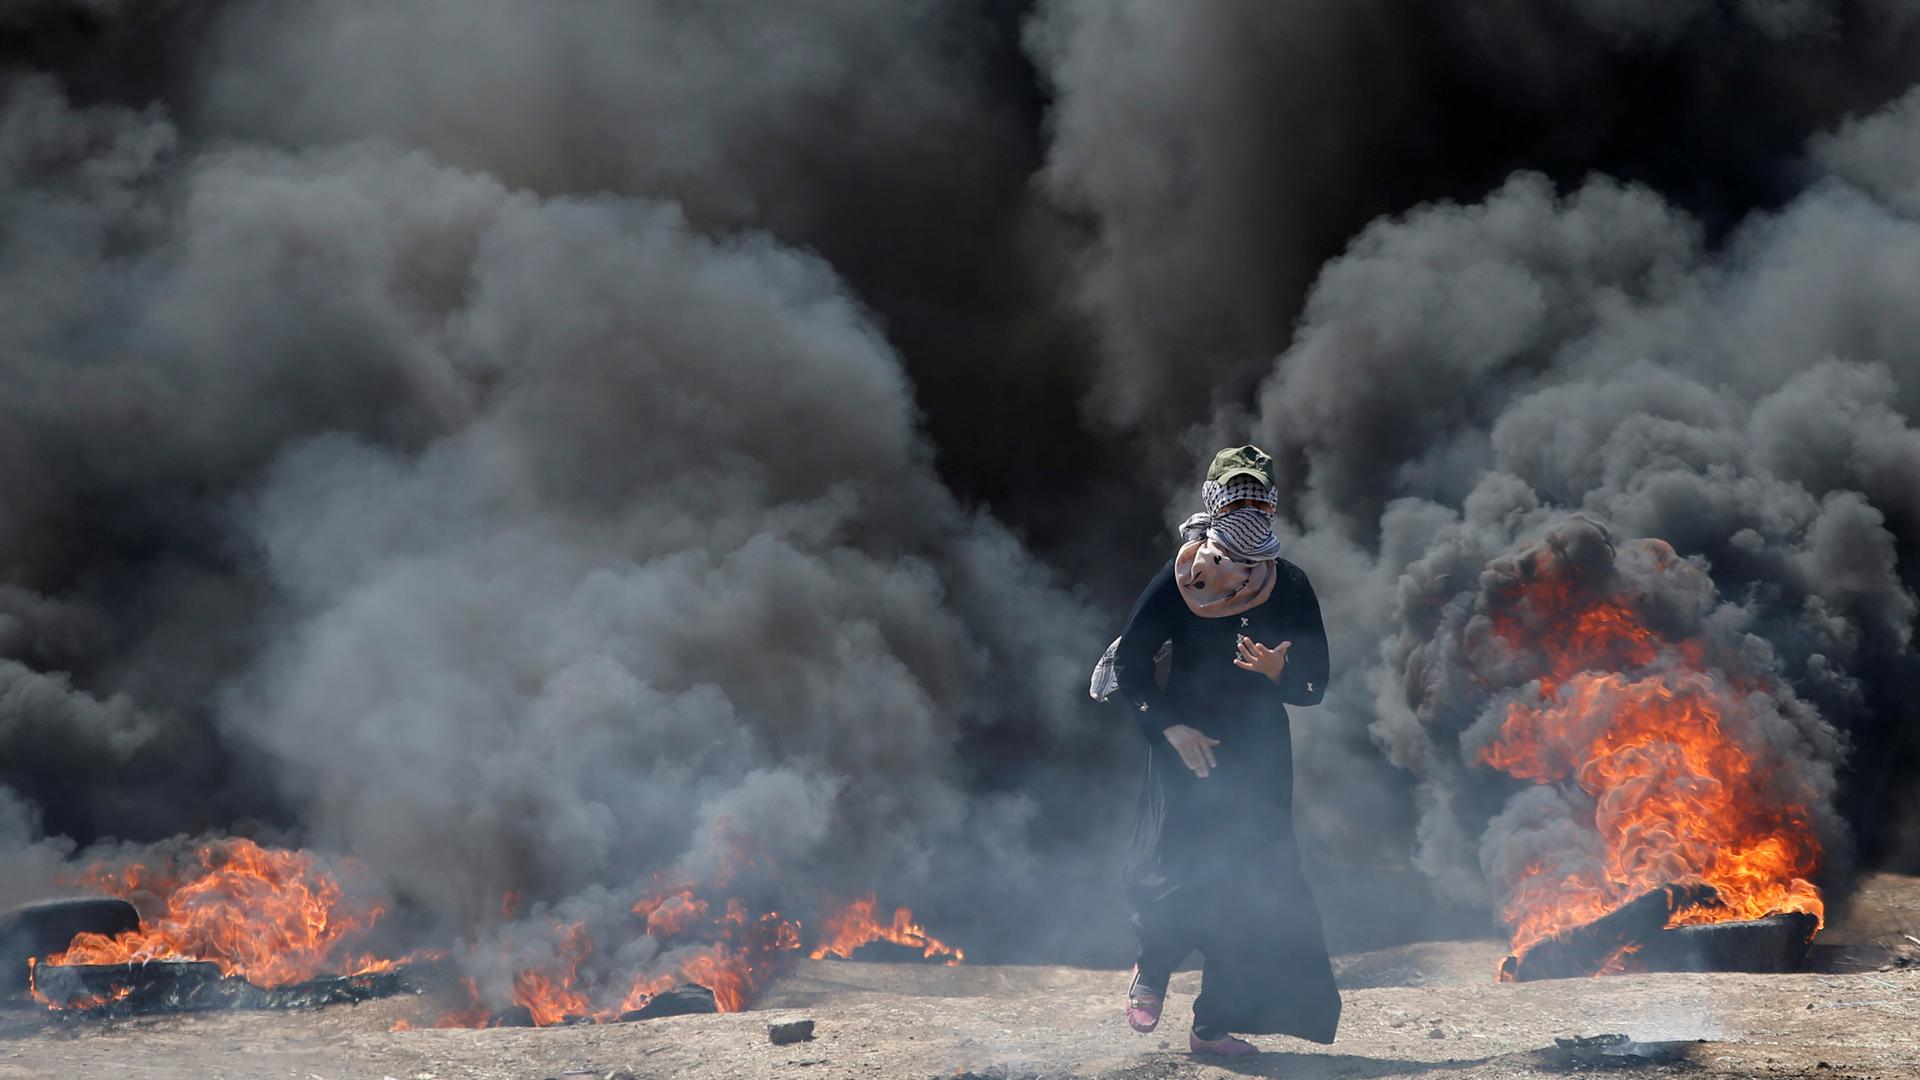 A Palestinian demonstrator walks with black smoke and tires burning in the background.